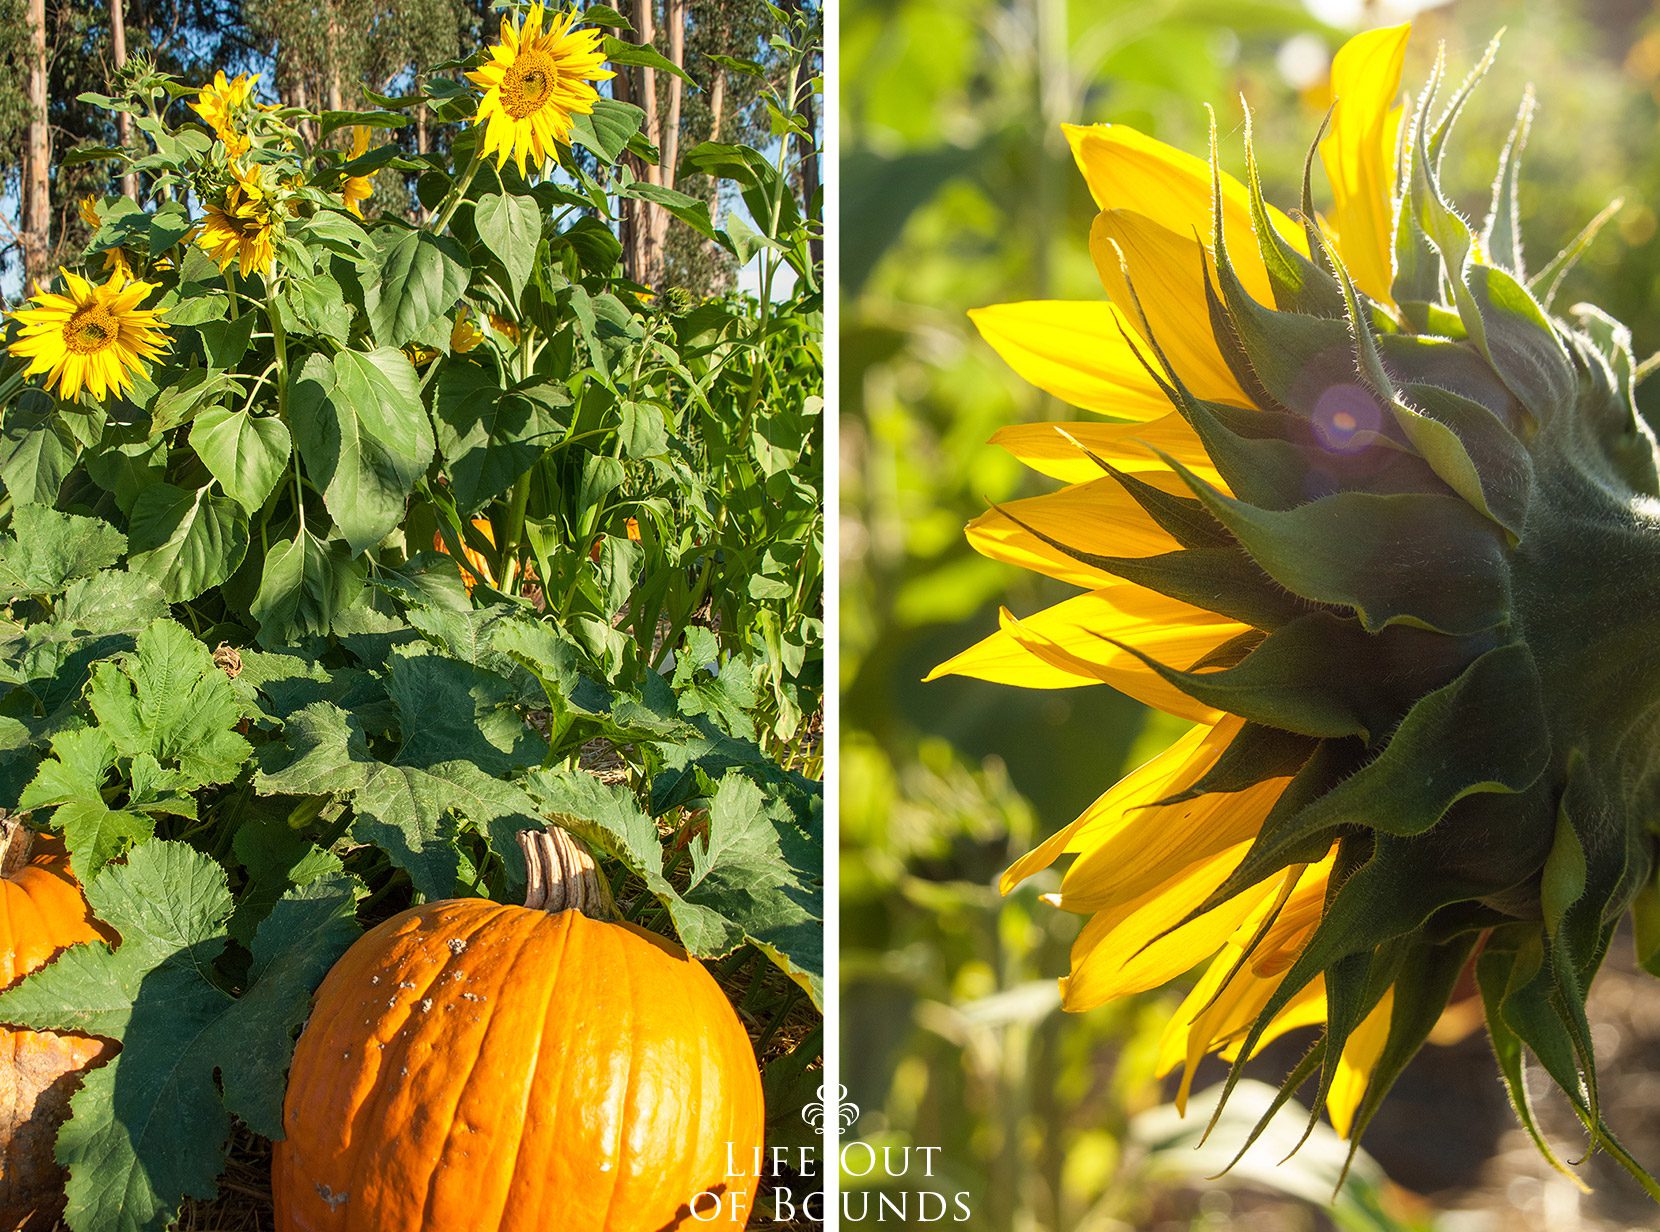 Pumpkins-and-sunflowers-at-a-pumpkin-patch-in-Napa-California